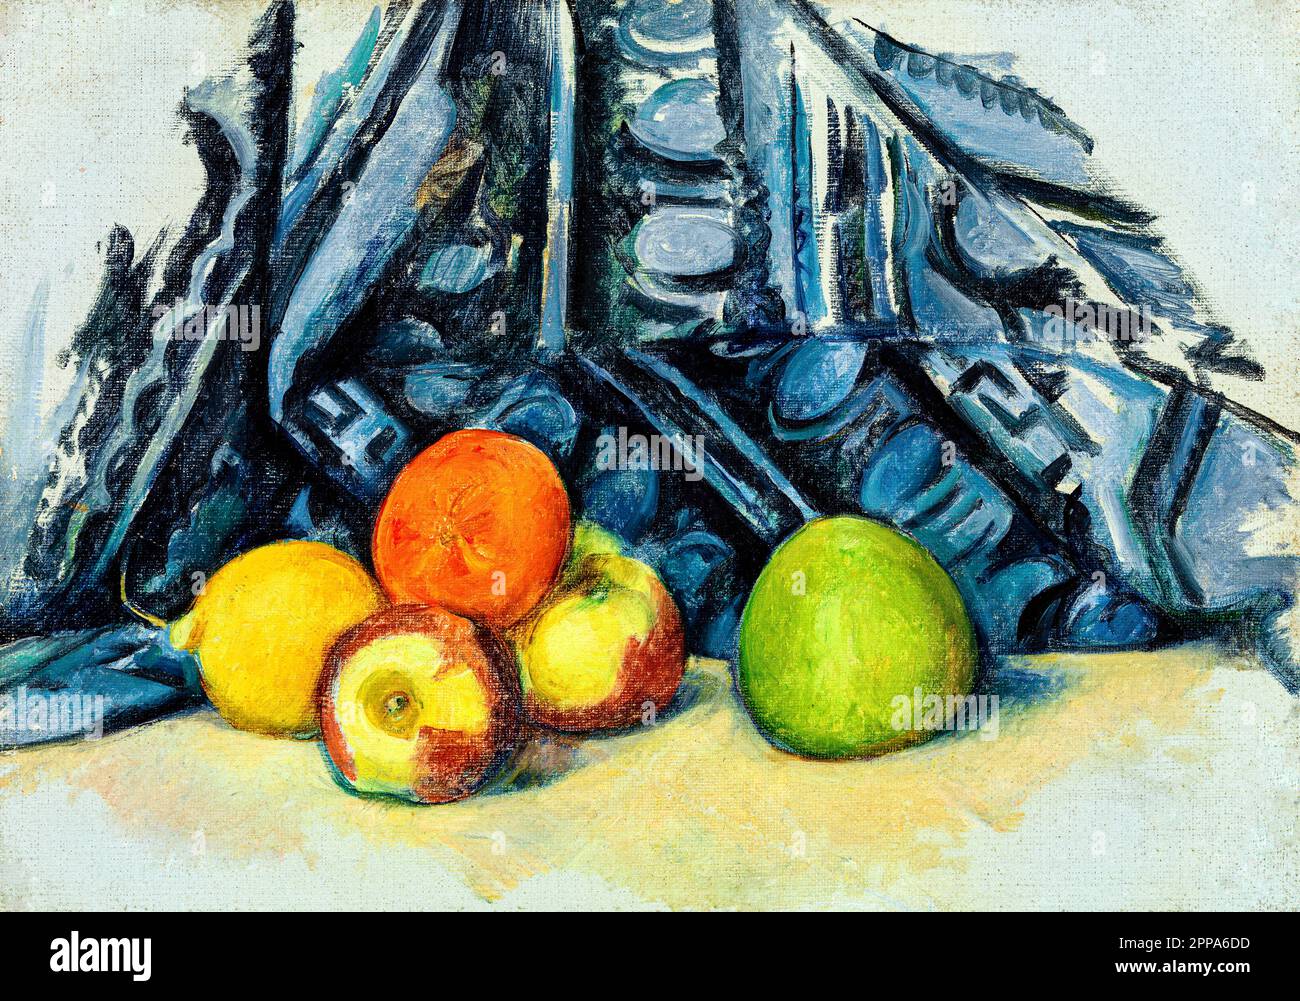 Apples and Cloth by Paul Cezanne. Original from Original from Barnes Foundation. Stock Photo